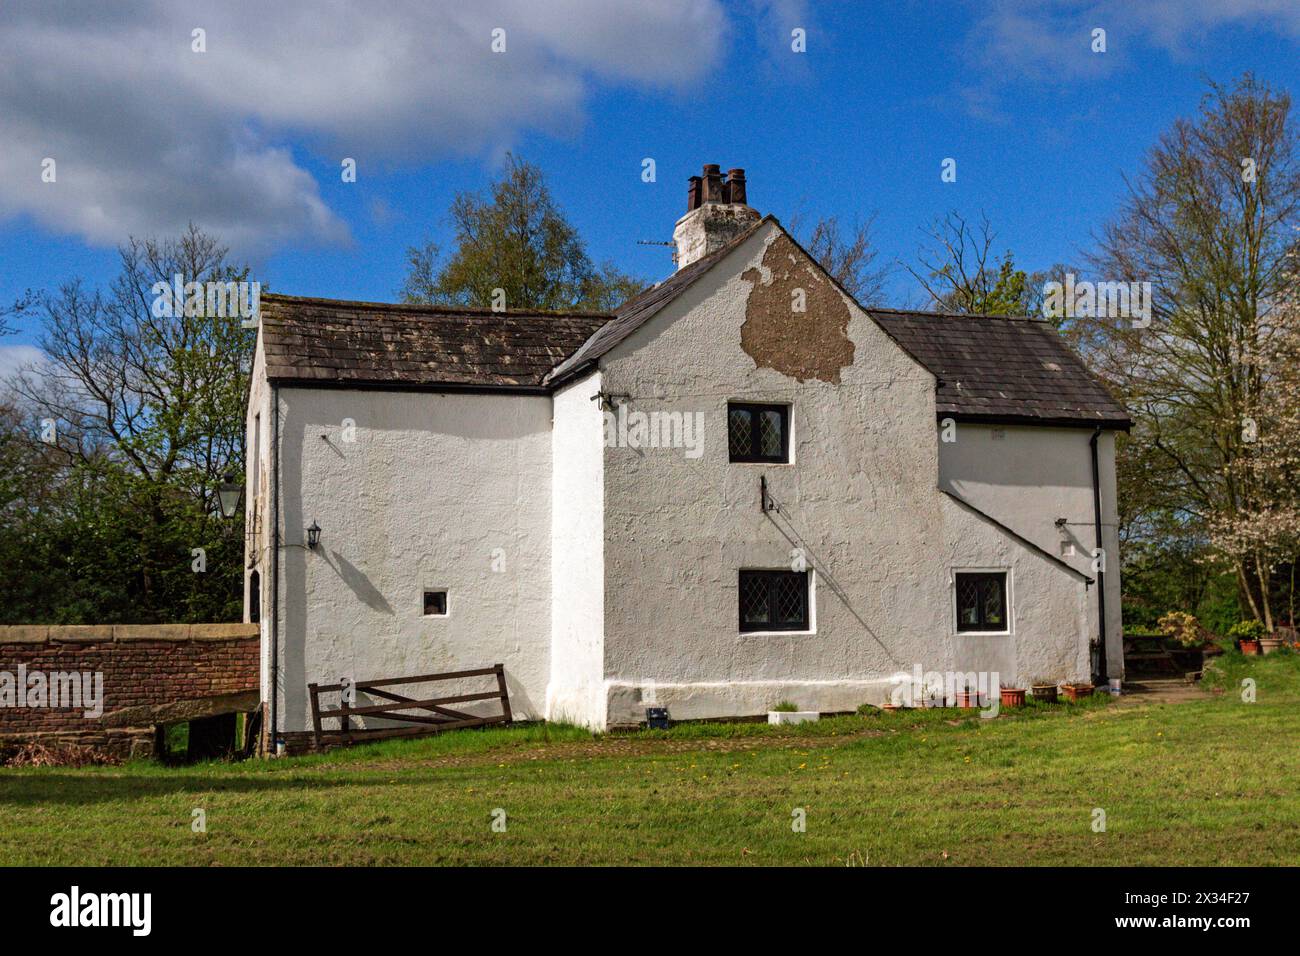 Chingle Hall, Goosnargh, Lancashire. Reputedly one of the most haunted houses in England. Stock Photo